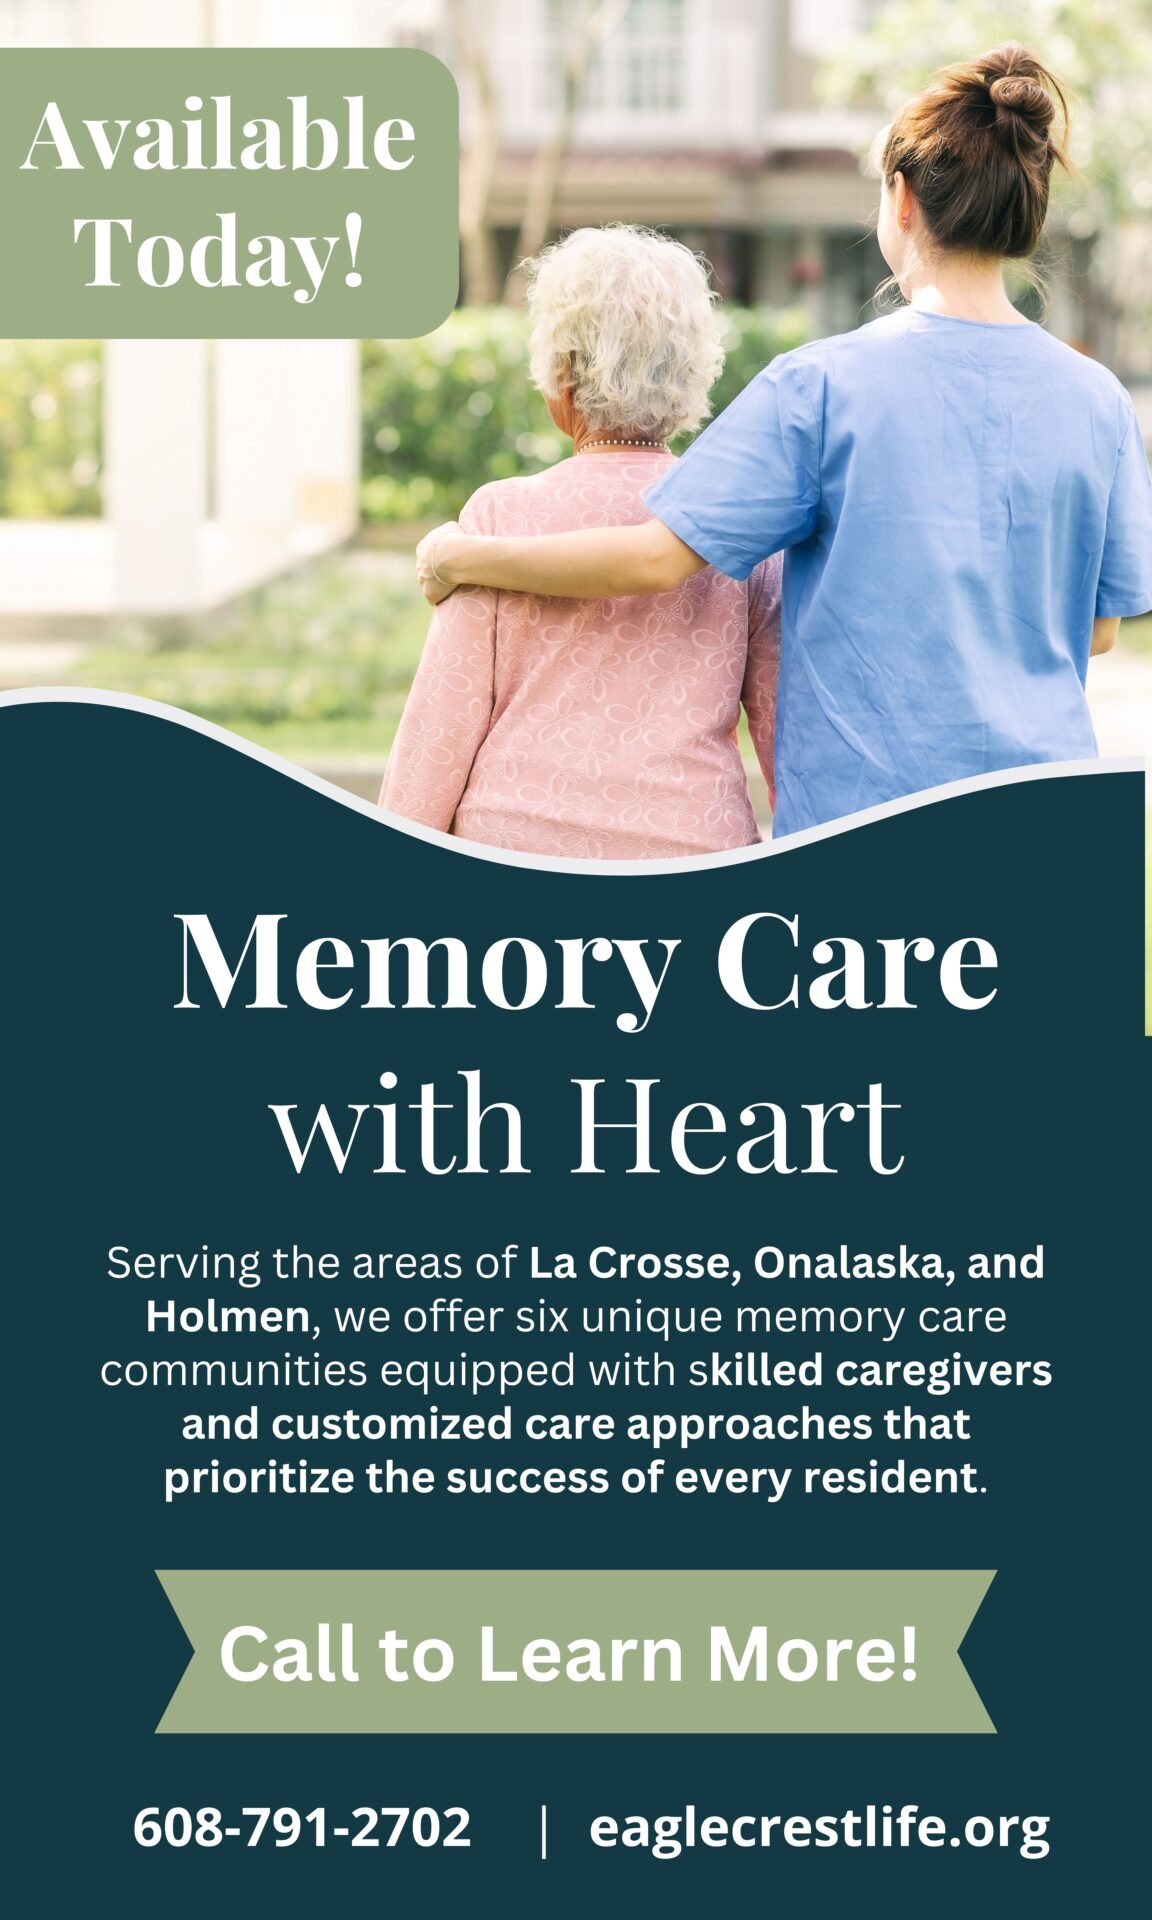 Currently serving La Crosse, Onalaska, and Holmen, our Memory care communities offer peace of mind and services that prioritize every resident's success. Call 608-791-2702 to learn more!